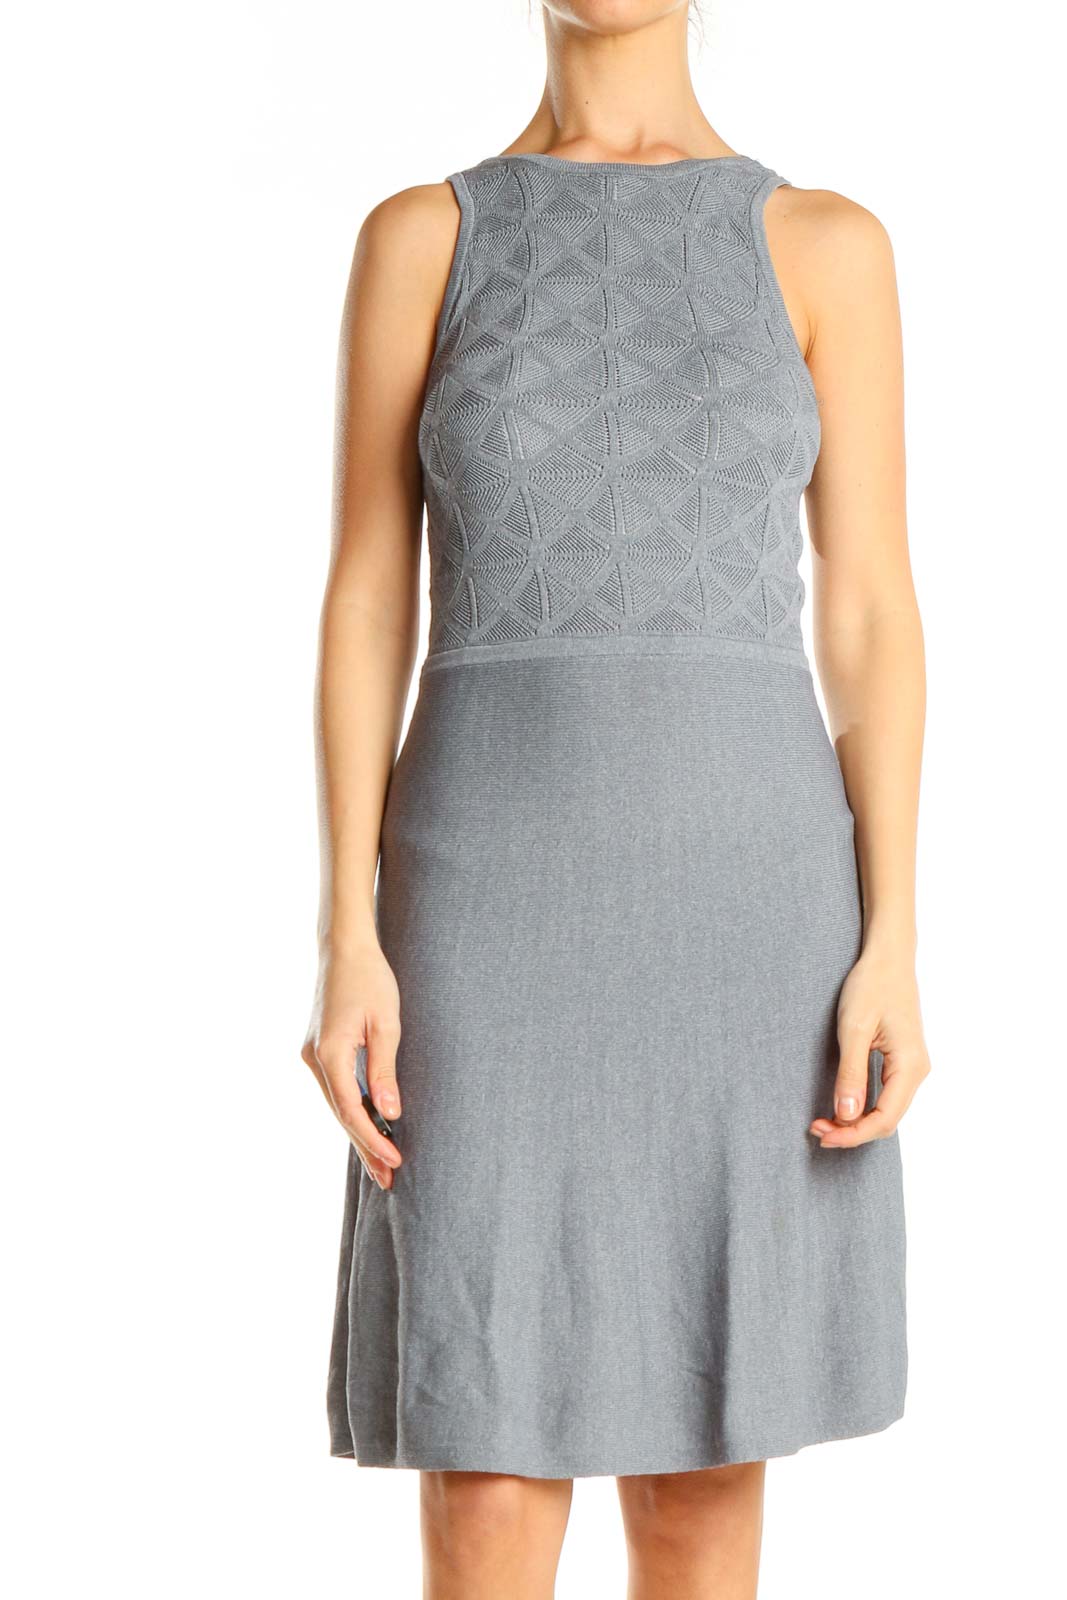 Gray Chic Textured Mini Dress Front